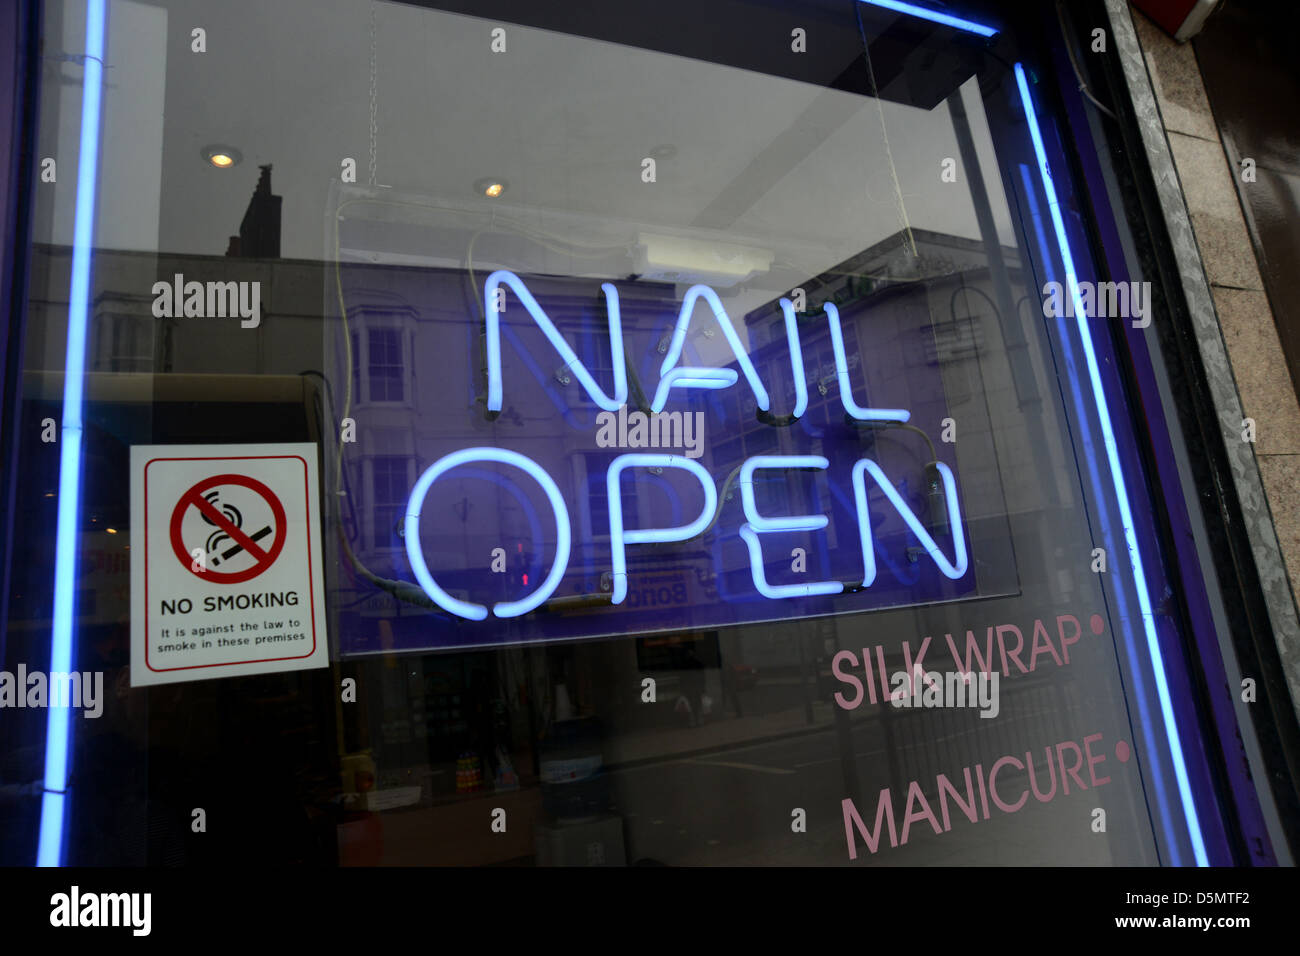 Nail Salon open sign in a shop window on Lewes Road in Brighton, East Sussex, UK. Stock Photo